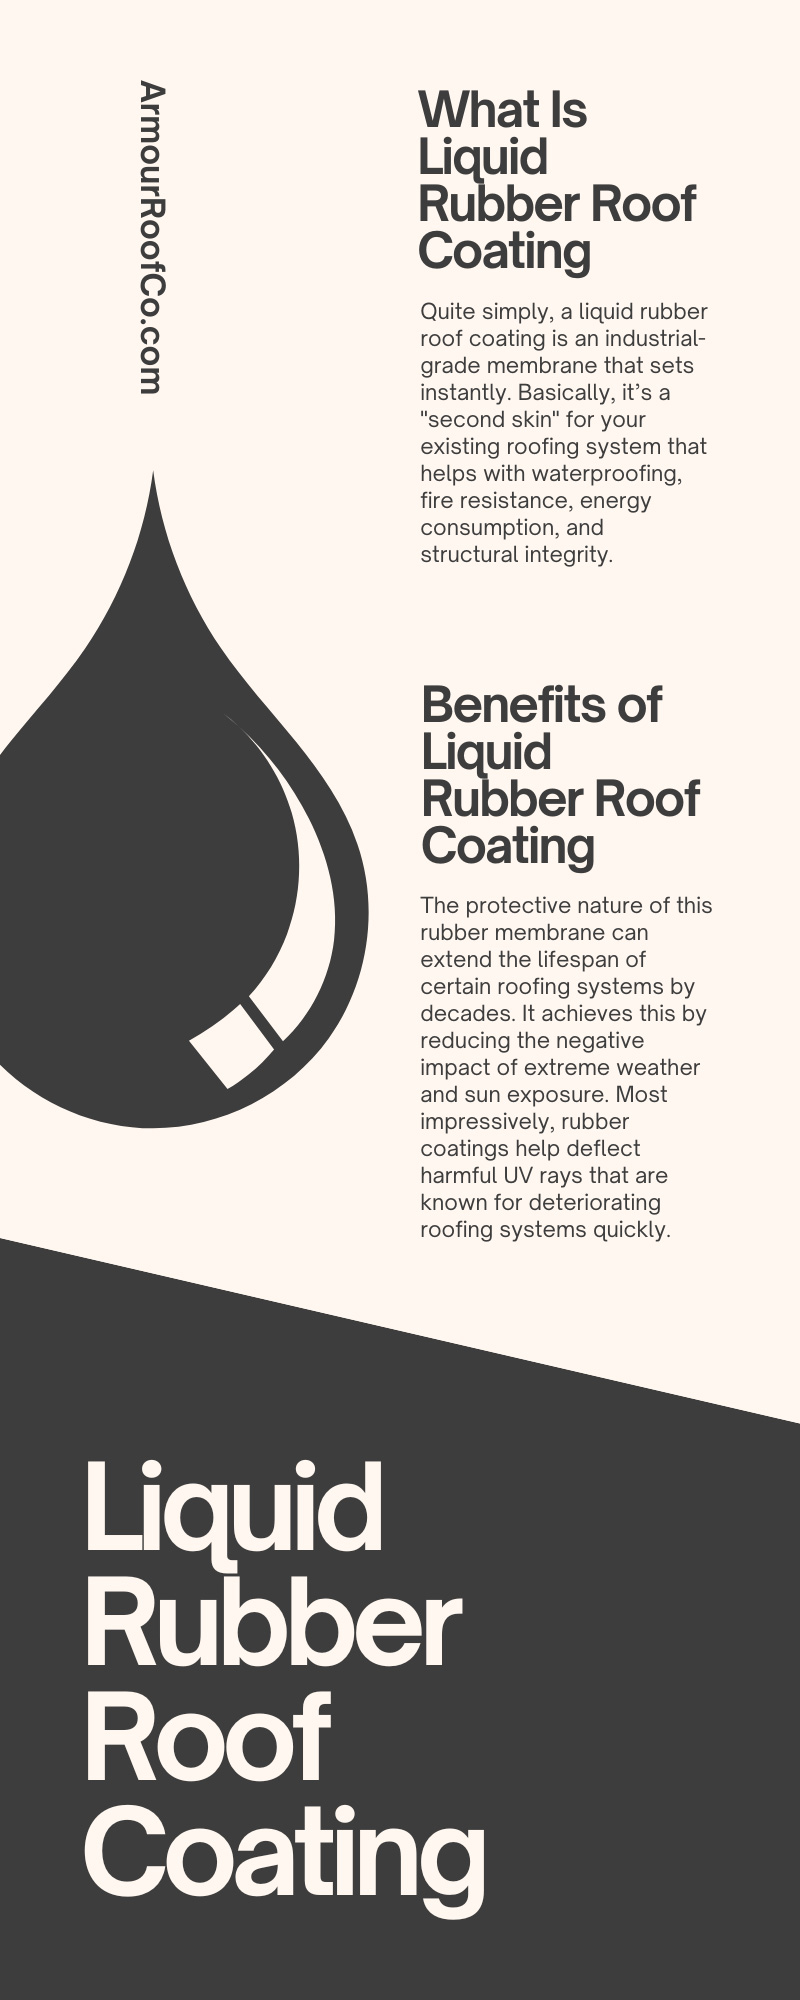 Everything You Need To Know About Liquid Rubber Roof Coating